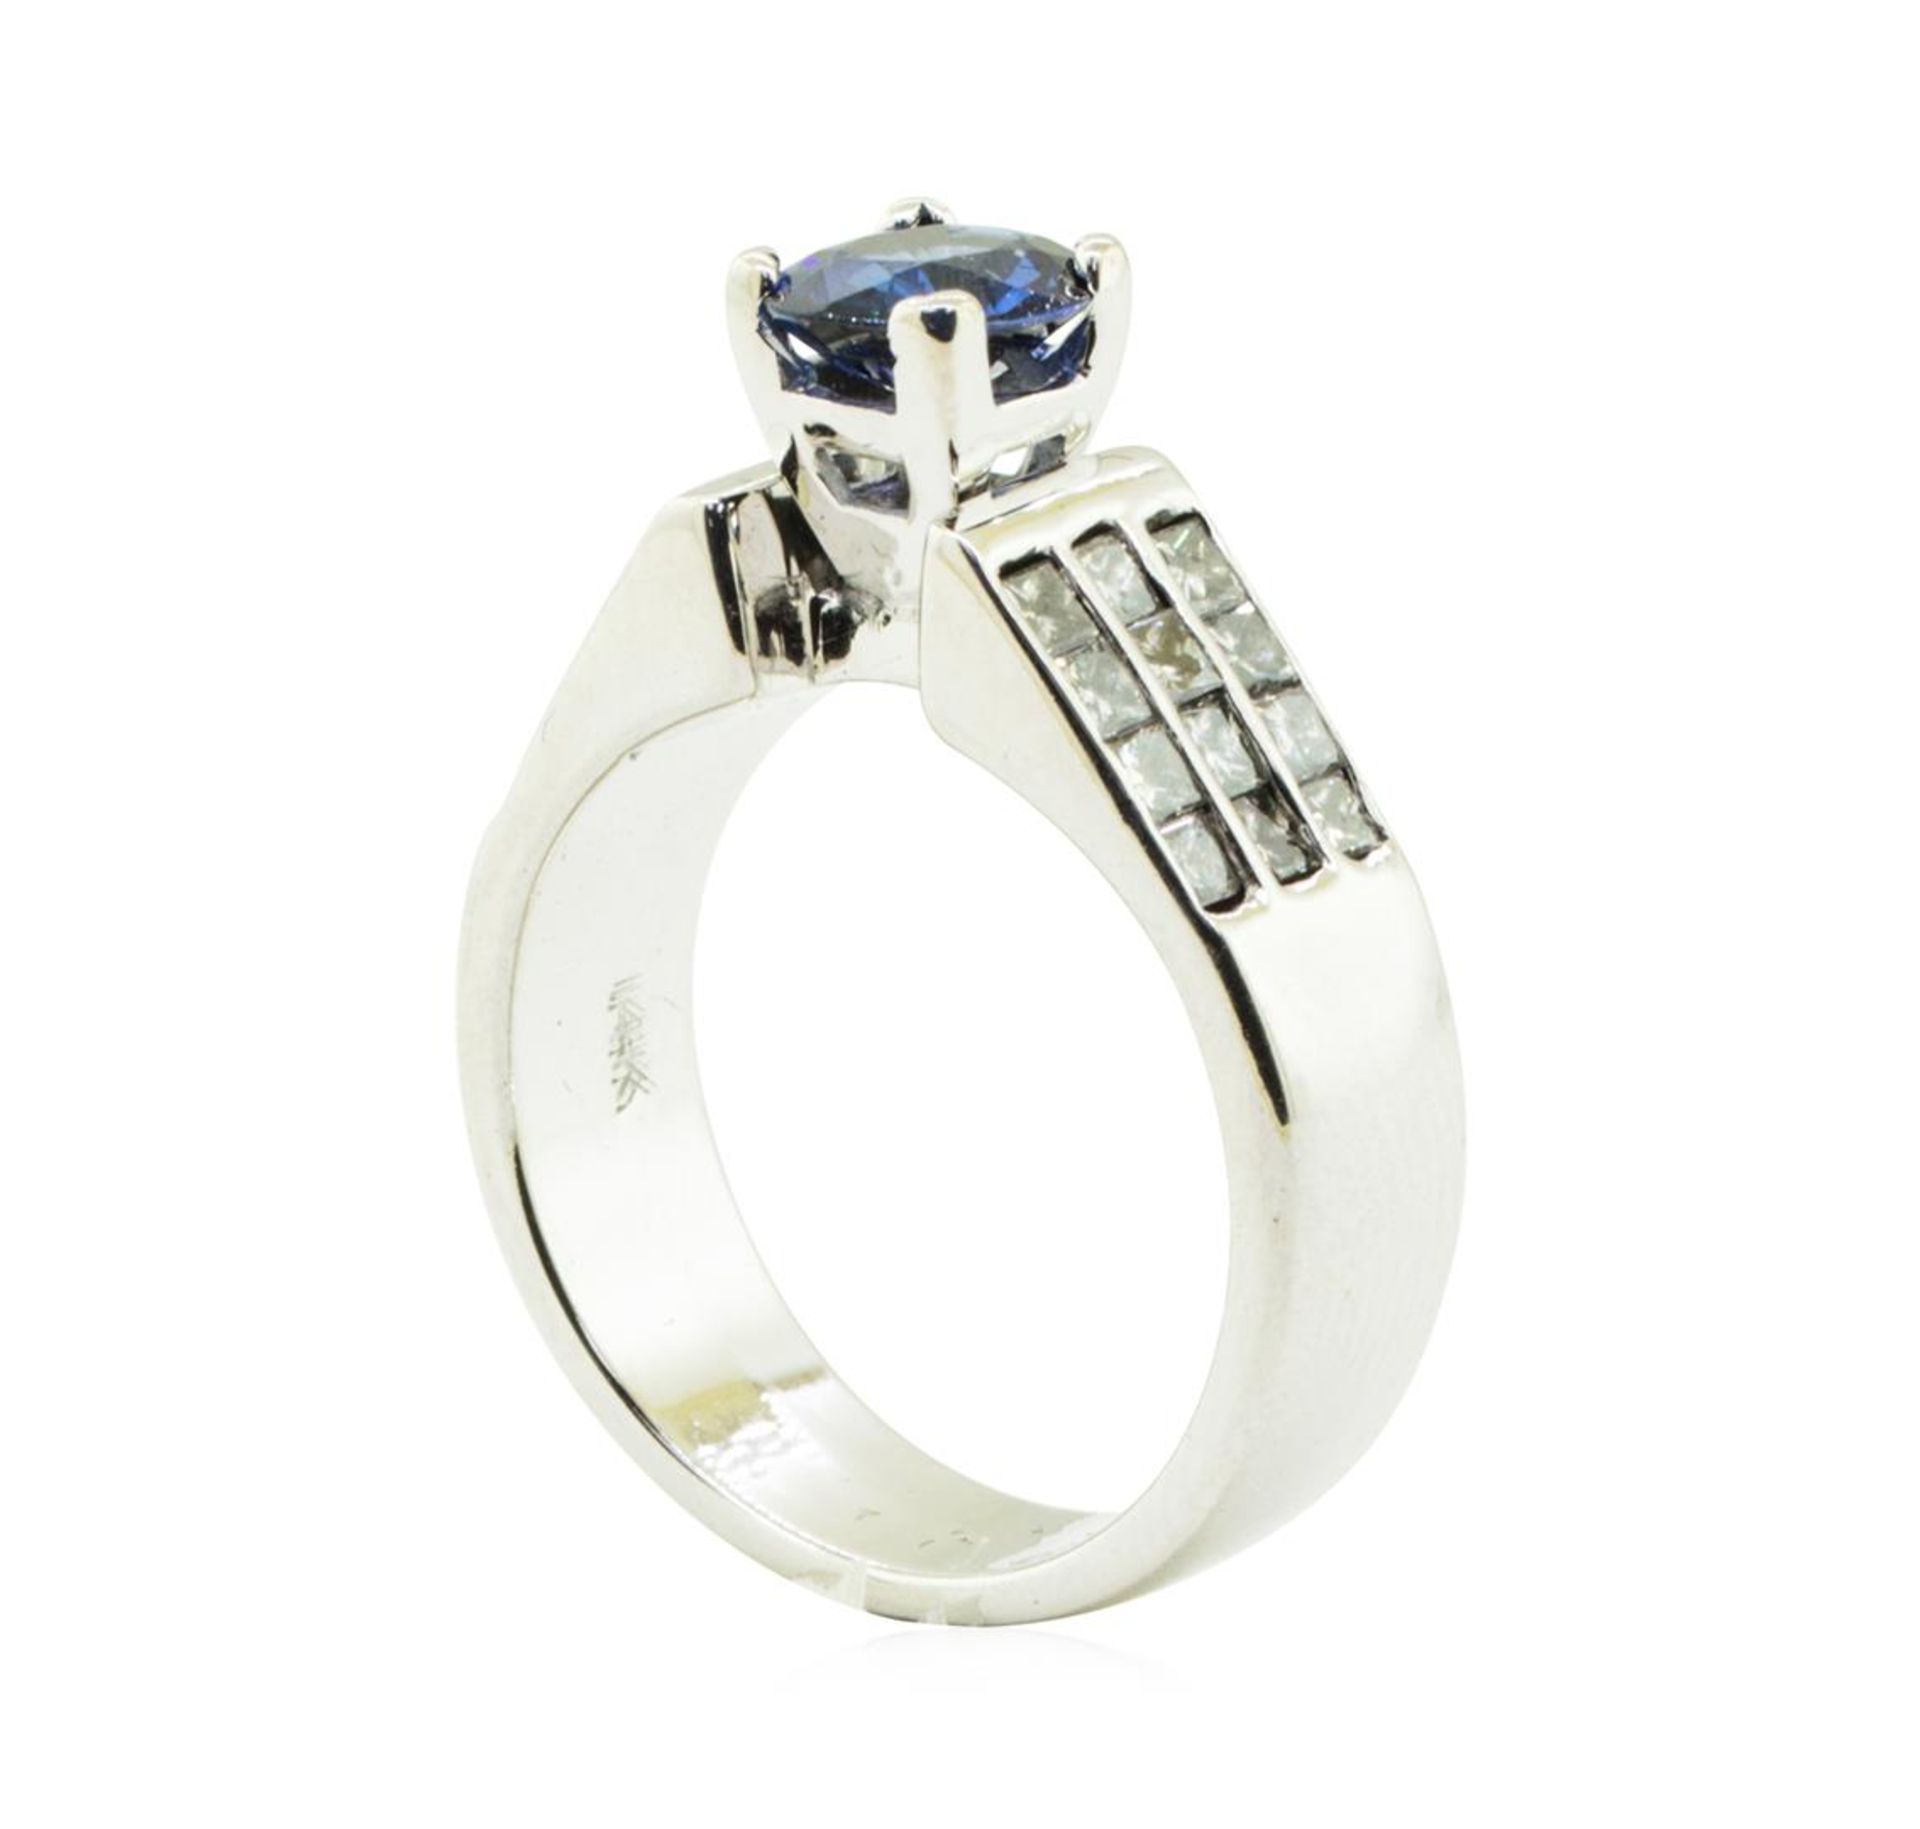 2.17 ctw Oval Brilliant Blue Sapphire And Diamond Ring - 14KT White Gold - Image 4 of 5